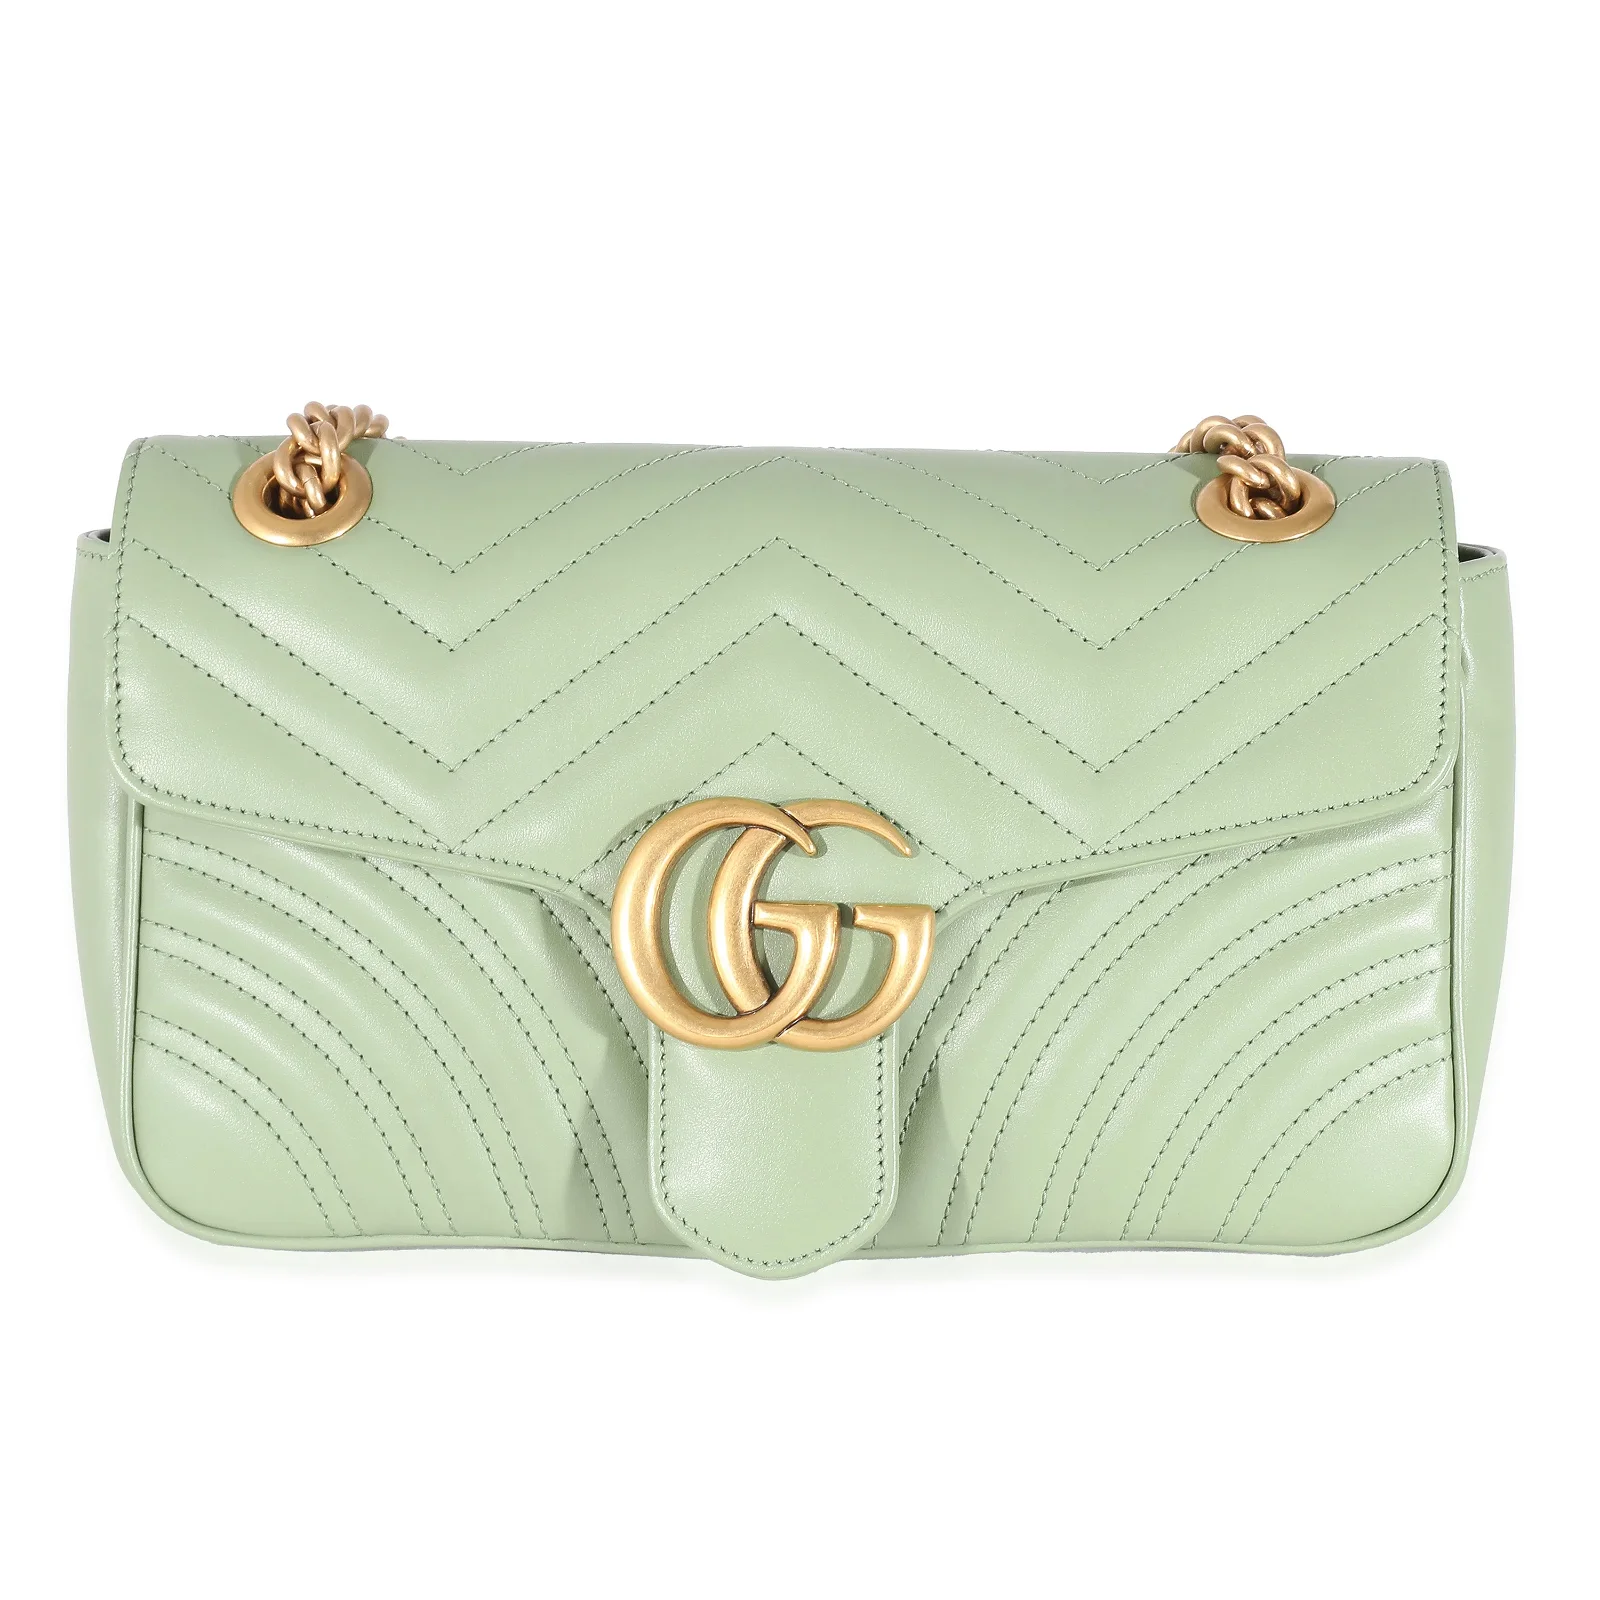 Image of Gucci Sage Green Matelasse\xa0Leather Small GG Marmont Flap Bag